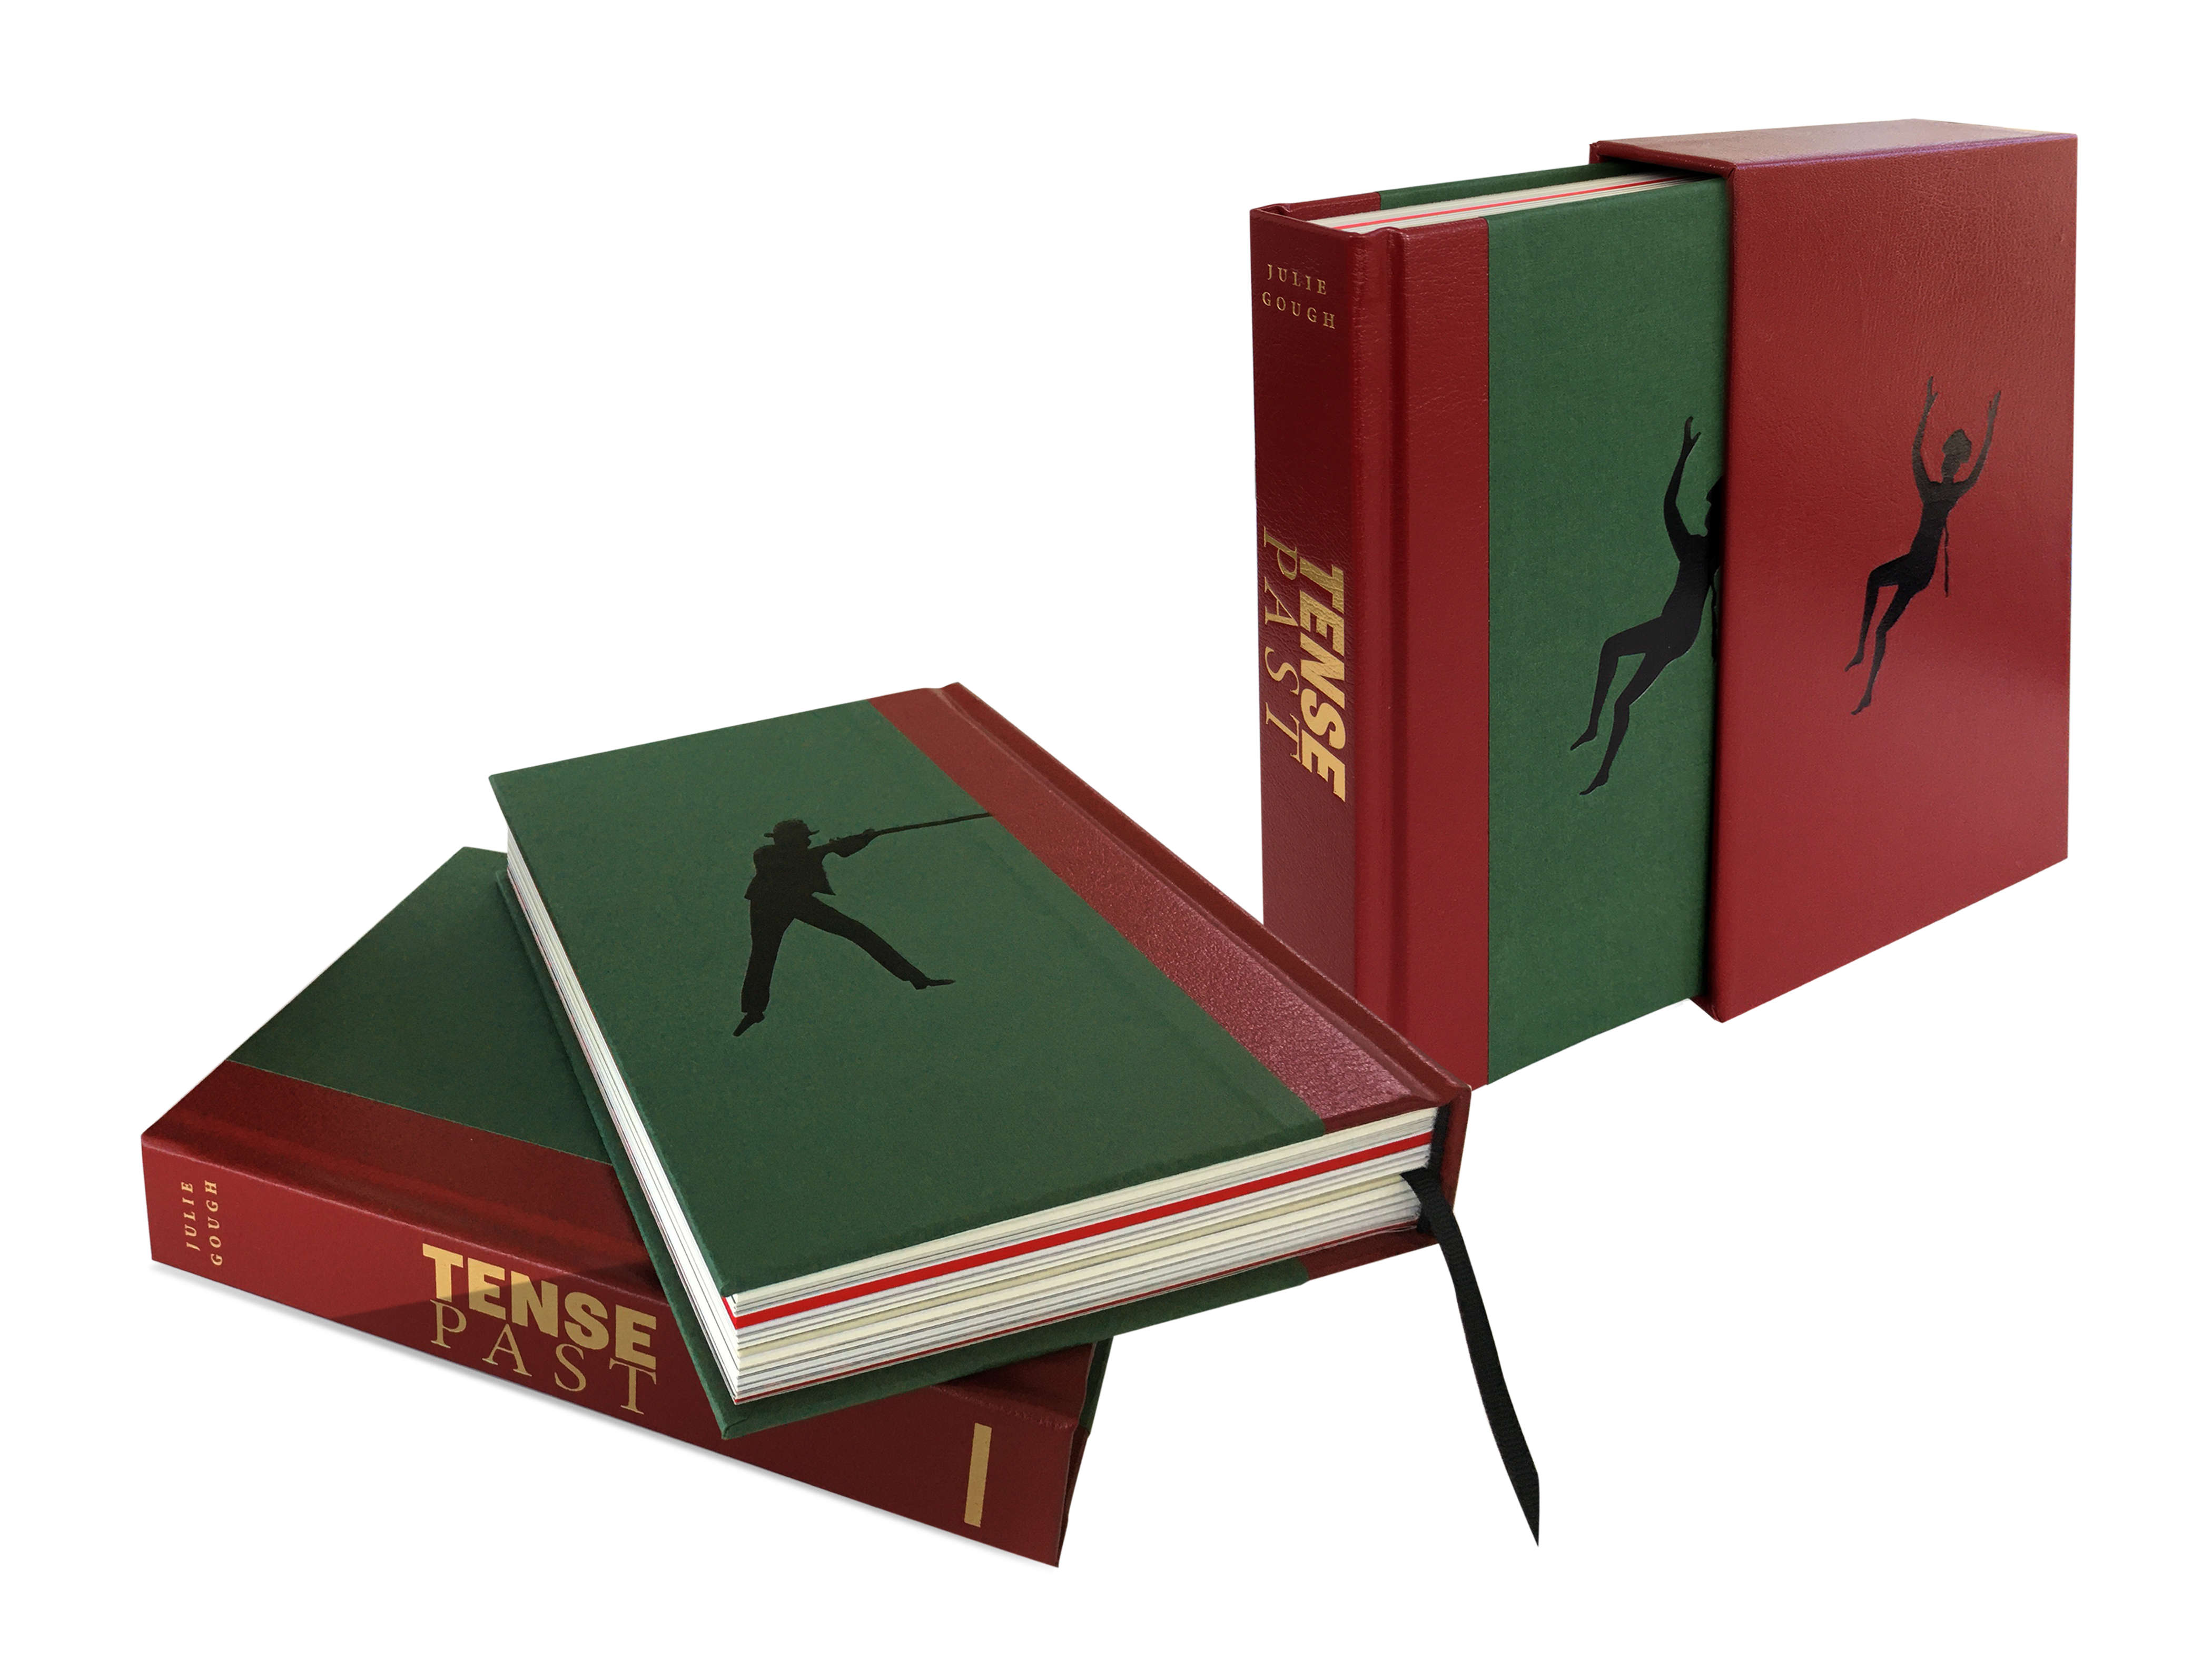 Montage image constructed by Lynda Warner showing three copies of the book TENSE PAST by Julie Gough. The books have red calf leatherette quarter bound spines and green hardcases with black foil silhouettes of a colonialist firing a gun and an Aboriginal man falling backwards after being shot. The title of the book and the author’s name are debossed in gold foil. One of the books also has a leather slipcase.